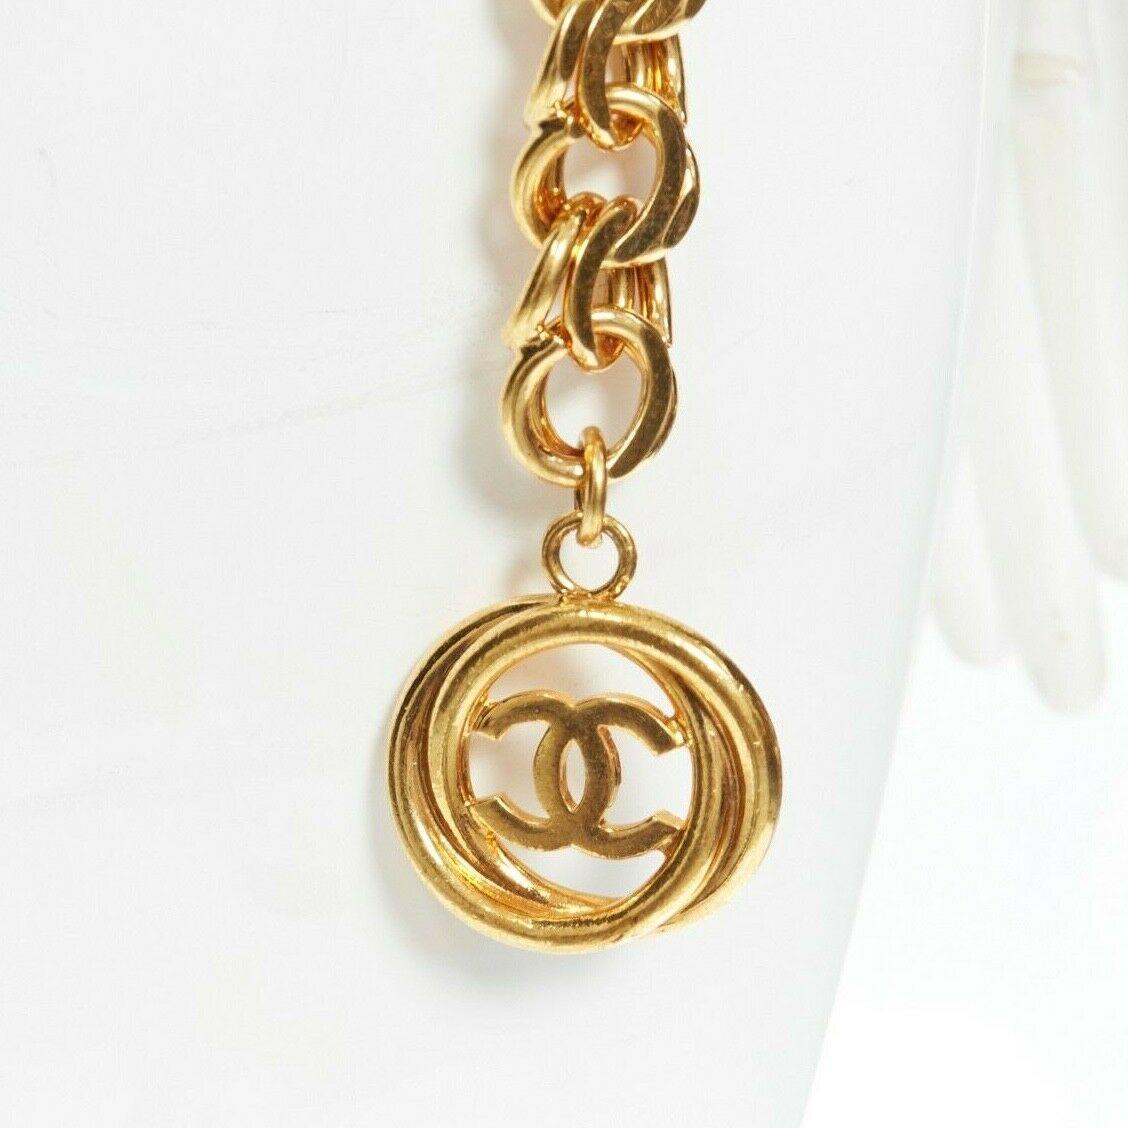 CHANEL KARL LAGERFELD heavy chunky gold-tone chain curb dual CC belt
Brand: CHANEL
Designer: Karl Lagerfeld
Model Name / Style: Chaib belt
Material: Metal
Color: Gold
Pattern: Solid
Closure: Hook & Loop
Extra Detail: Multi-strand giant faux pearl.